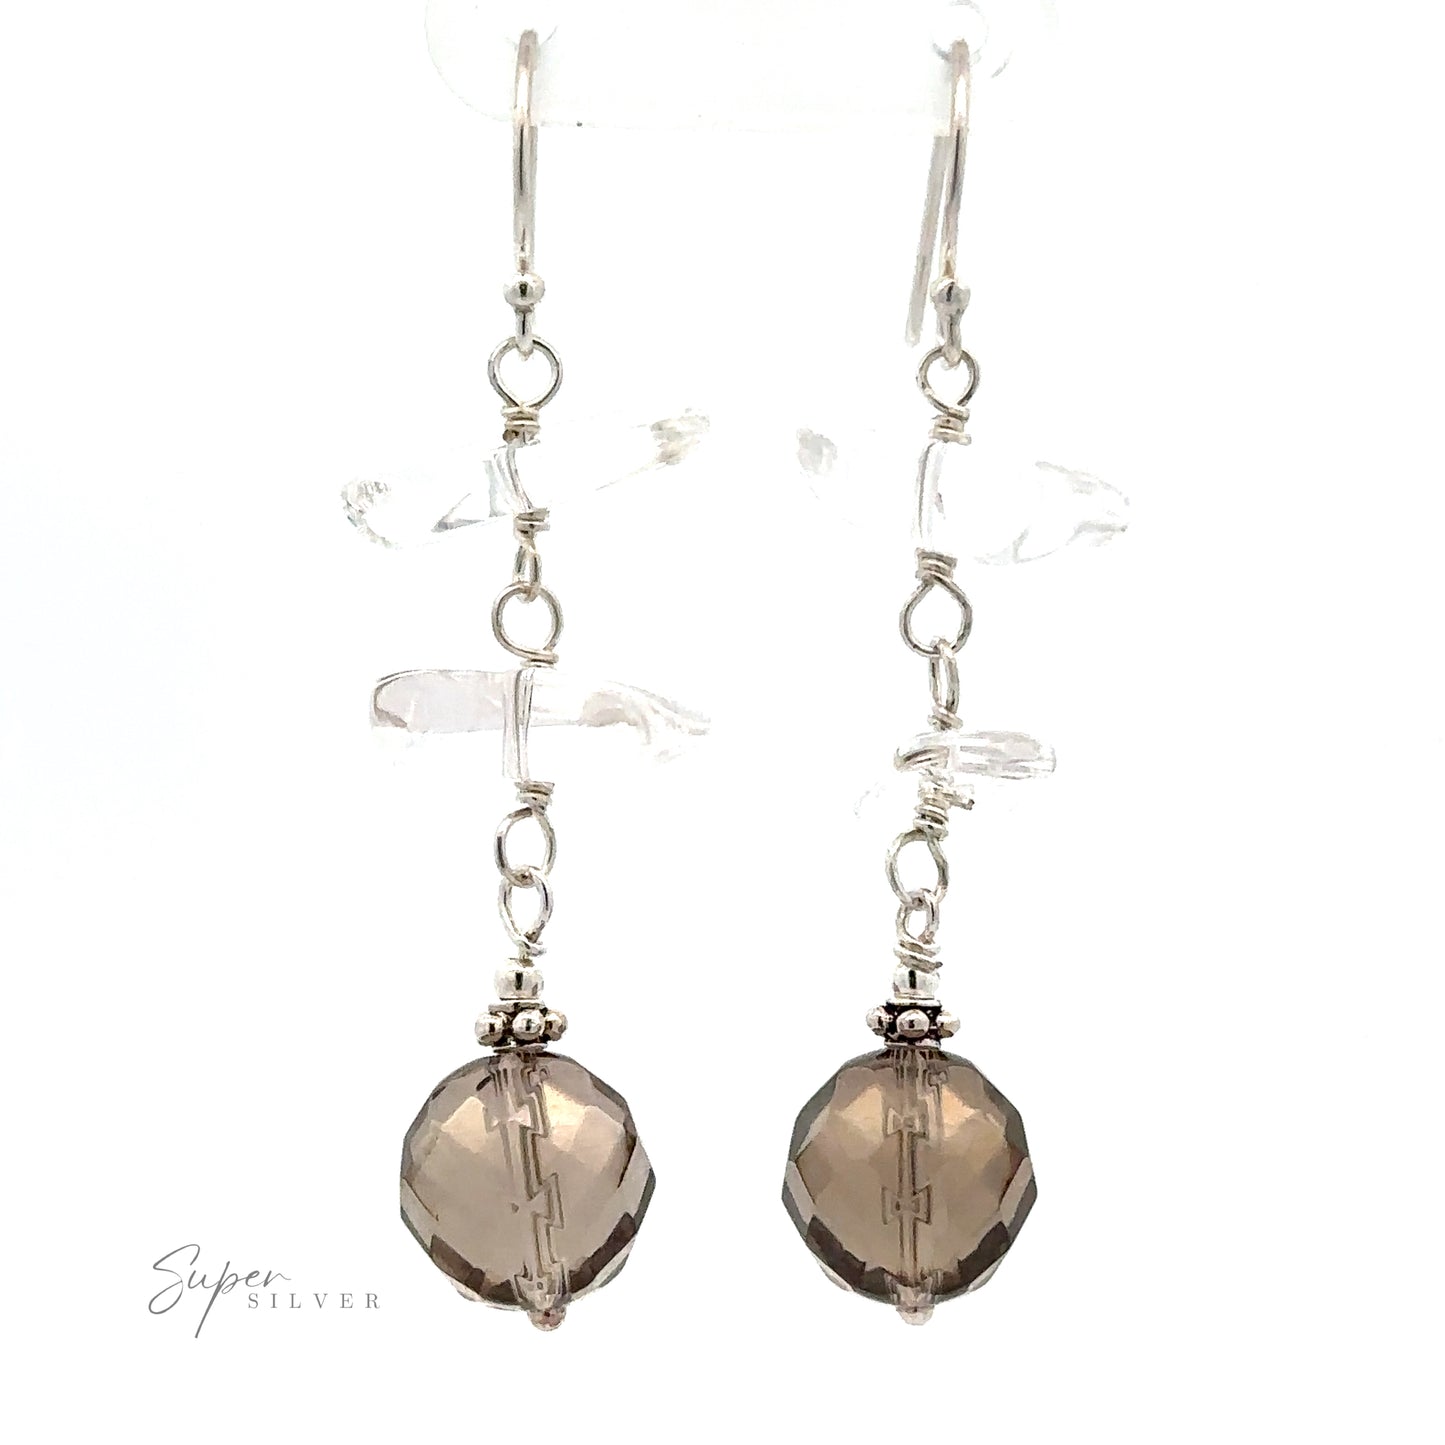 
                  
                    A pair of Earrings with Clear and Faceted Gray Beads featuring translucent and multicolored beads, complemented by larger smoky brown faceted beads at the ends. Crafted with thin sterling silver hooks, they offer a touch of elegance. "Super Silver" text is shown in the bottom left corner.
                  
                